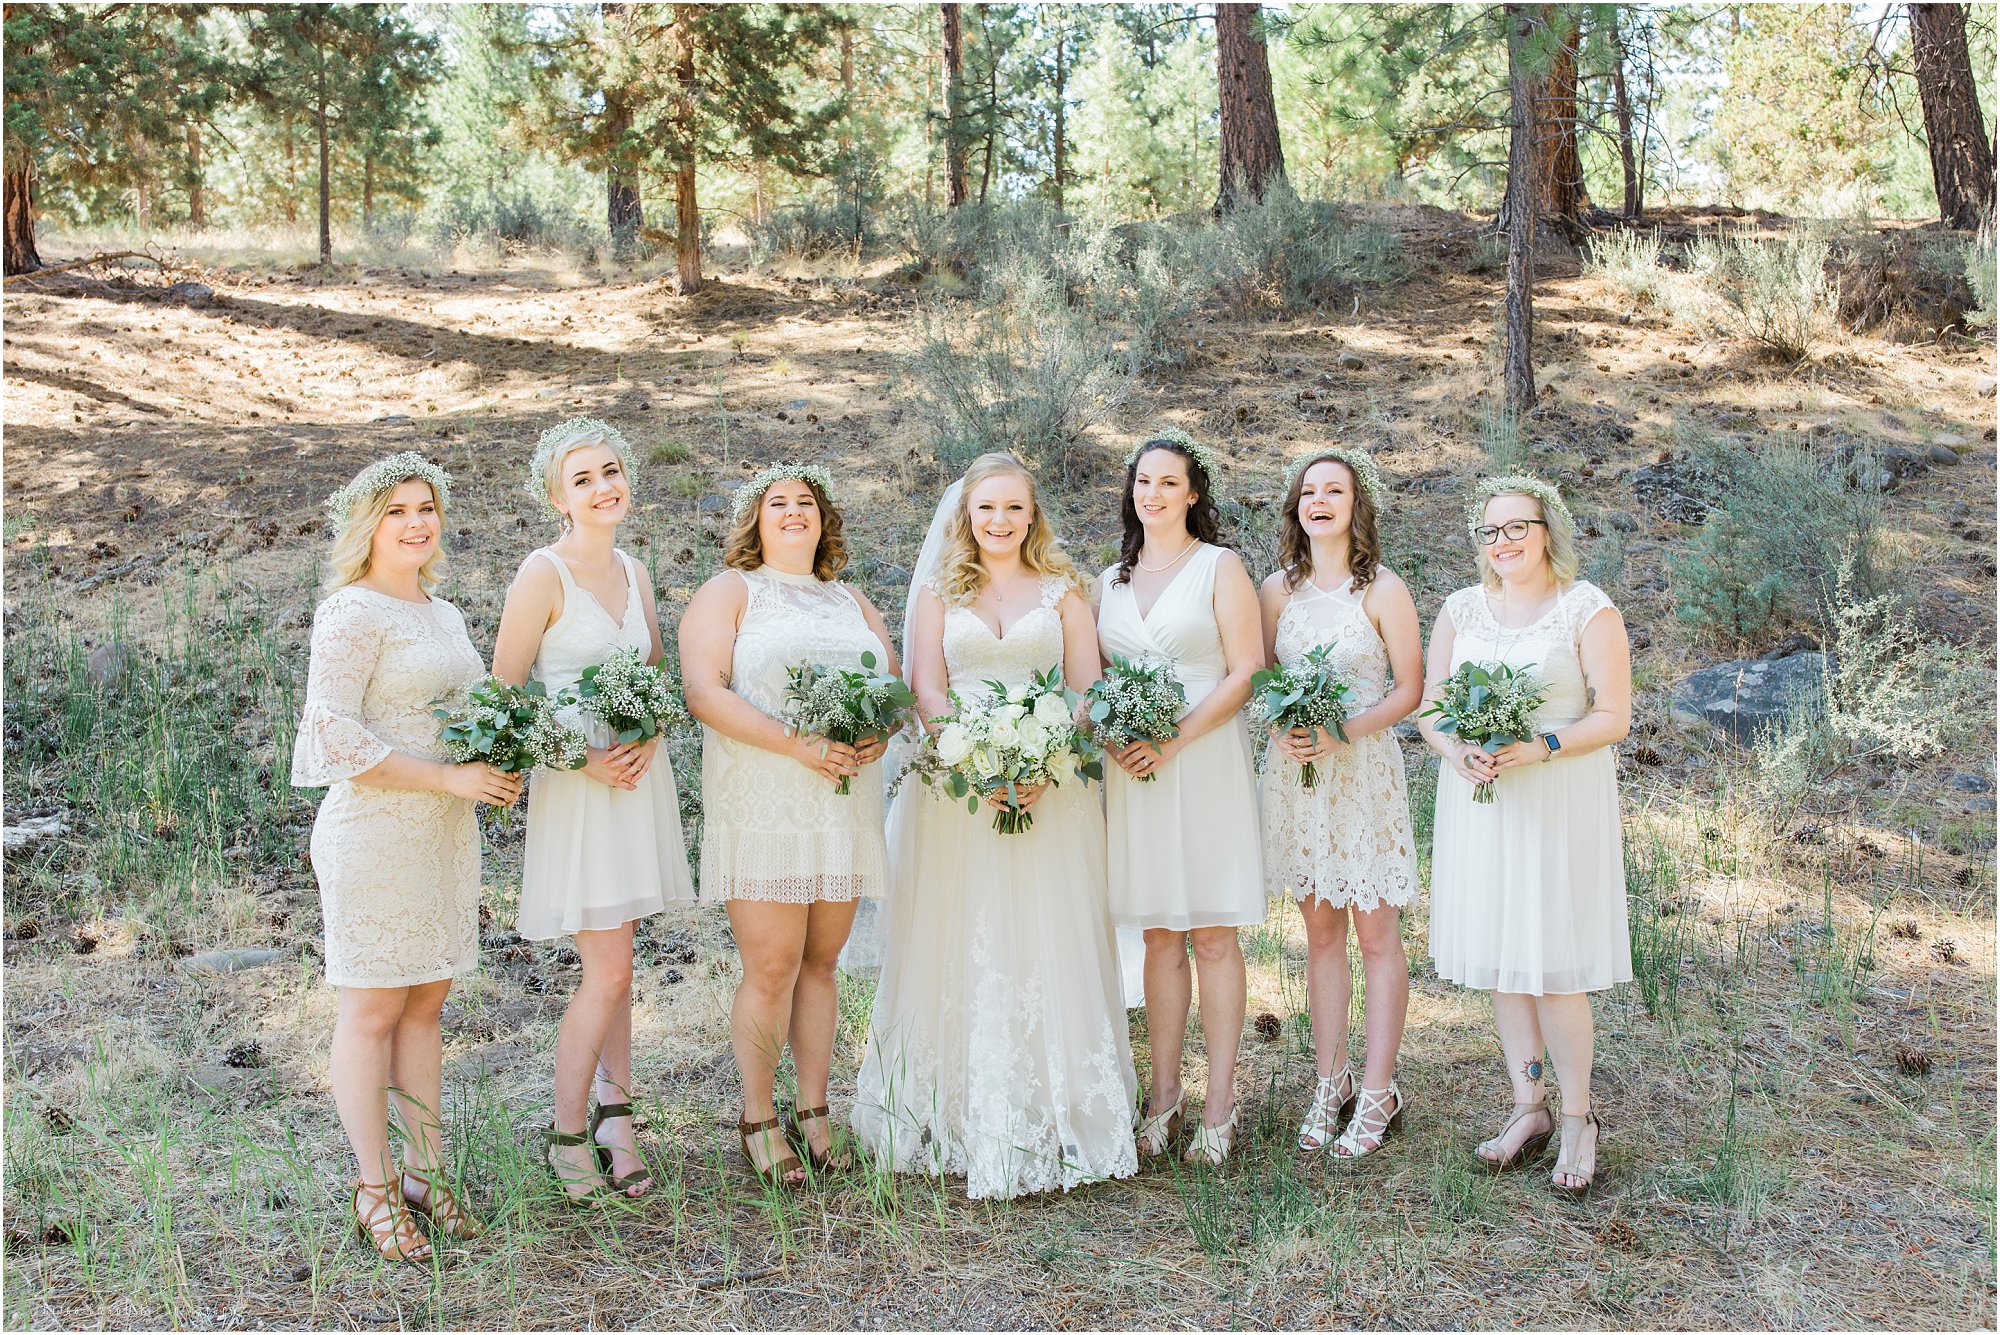 Stunning bride and her bridesmaids wearing all white for this vintage rustic chic Bend wedding theme at Aspen Hall. | Erica Swantek Photography